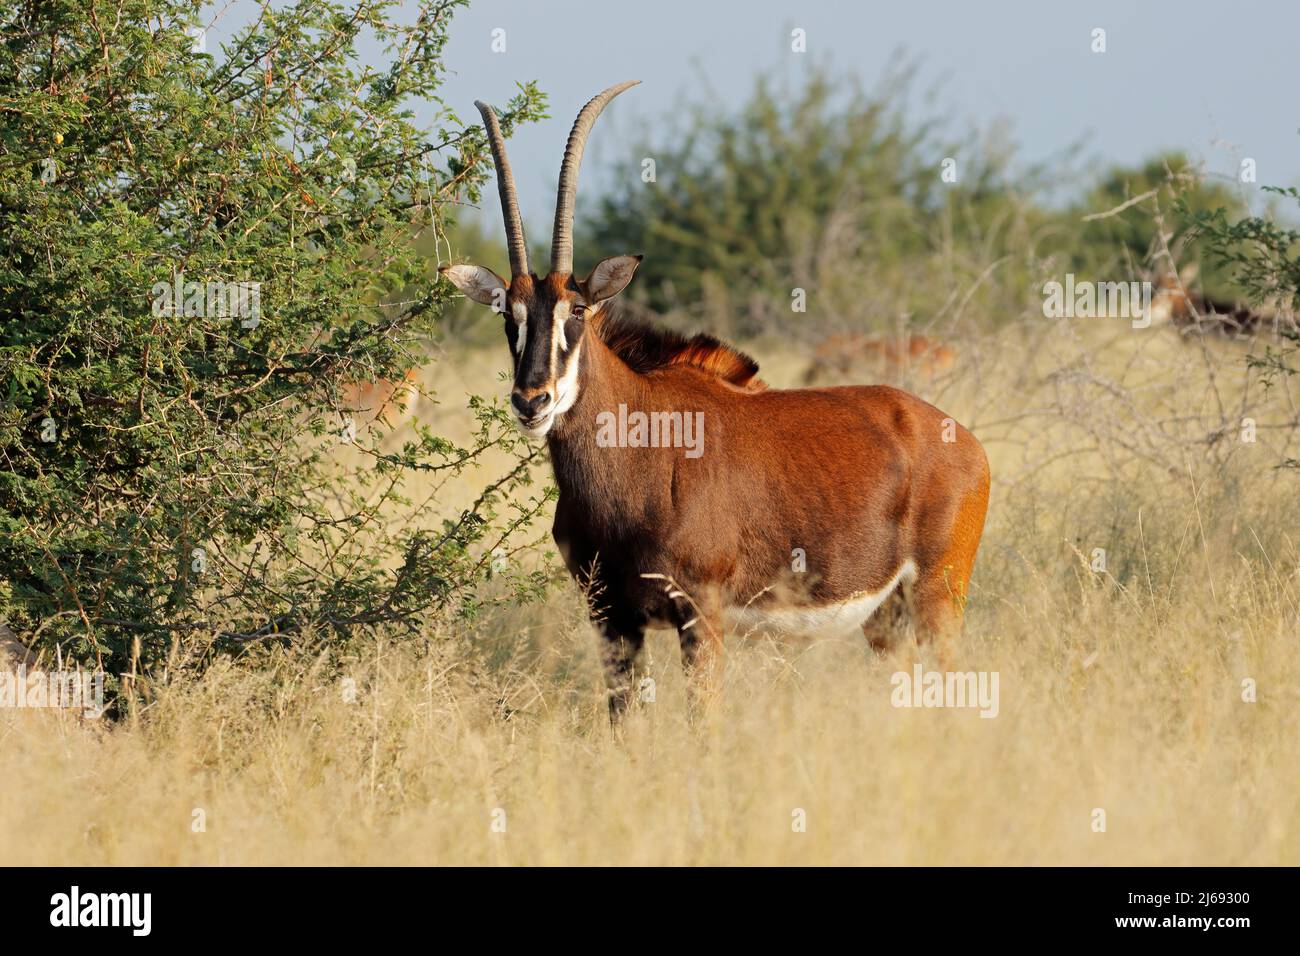 A sable antelope (Hippotragus niger) in natural habitat, South Africa Stock Photo